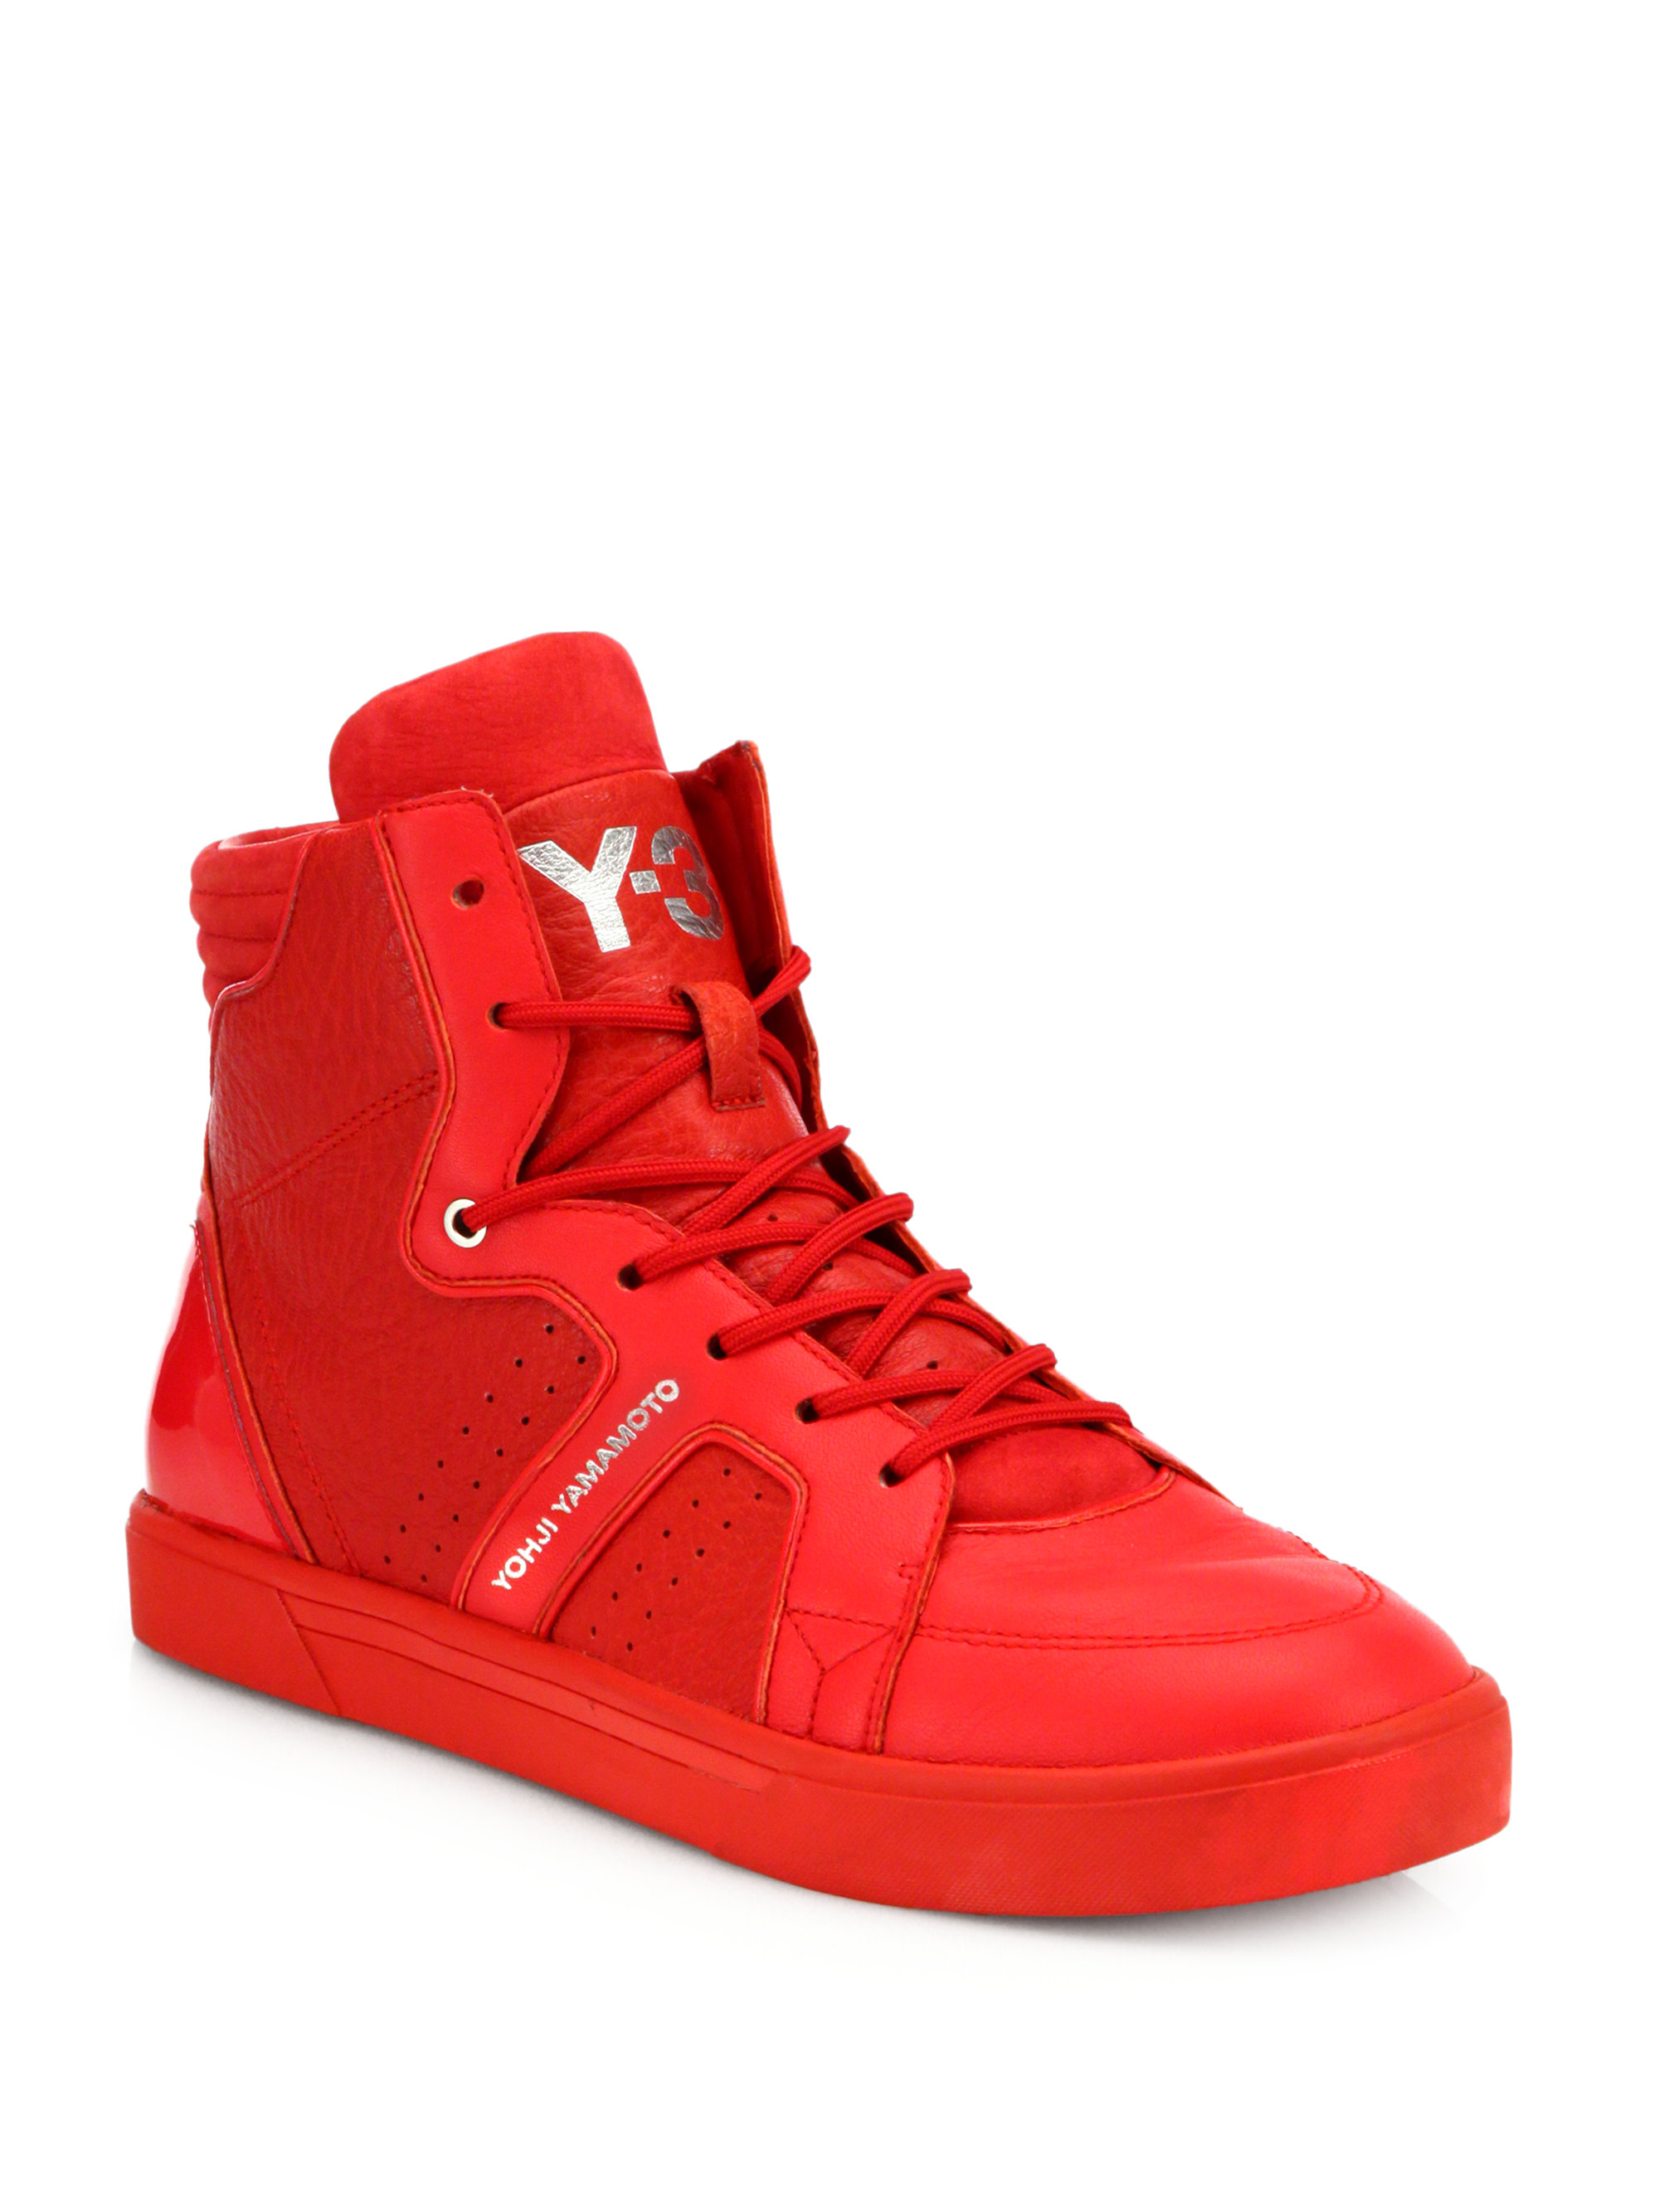 Y-3 Rydge Leather High-Top Sneakers in Red for Men - Lyst